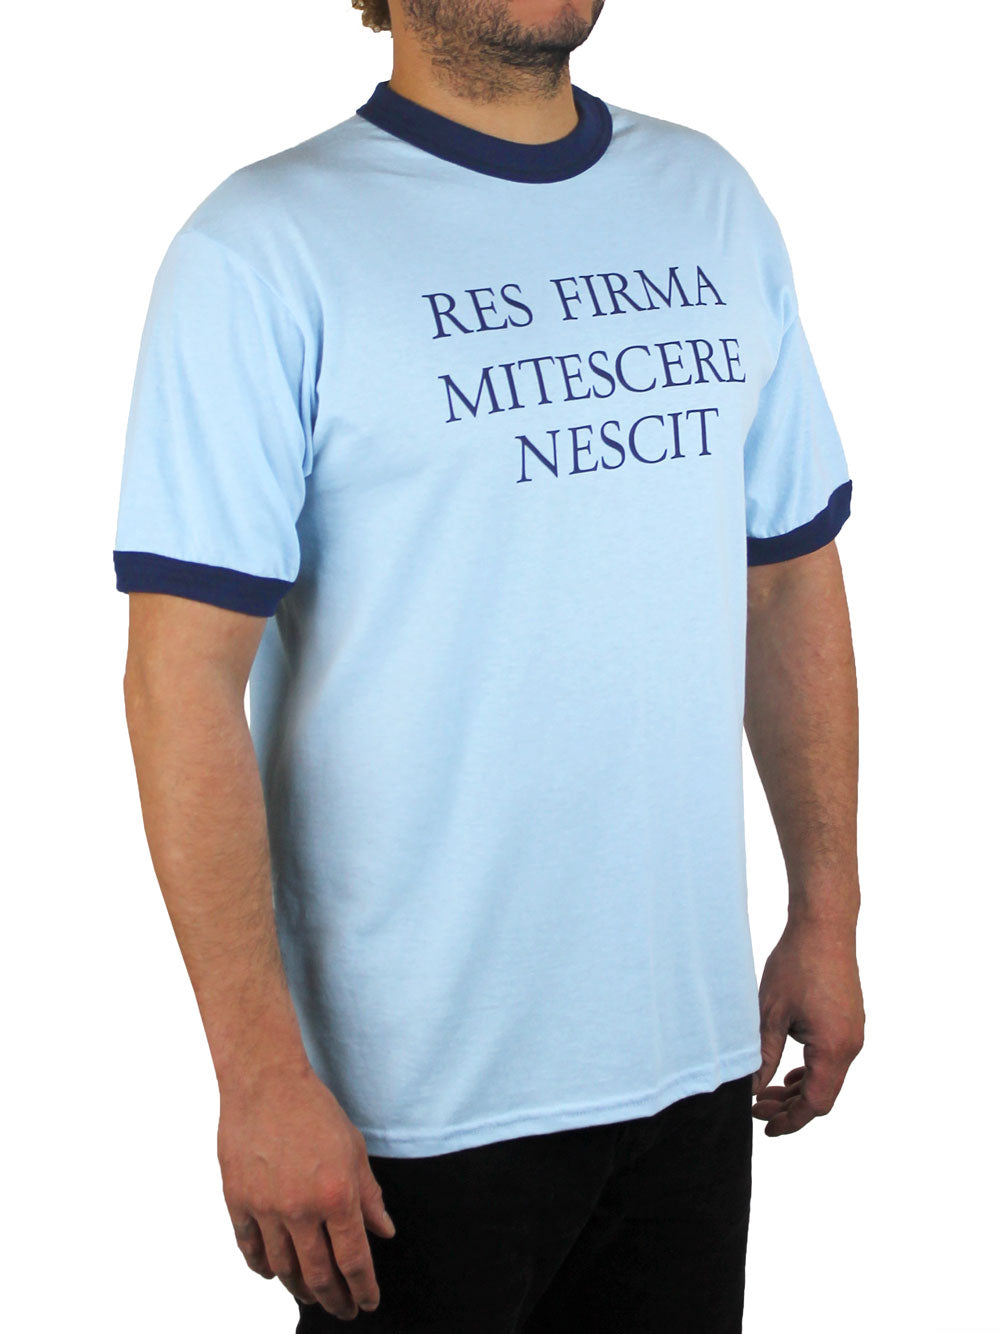 Res Firma Shirt 3/4 View